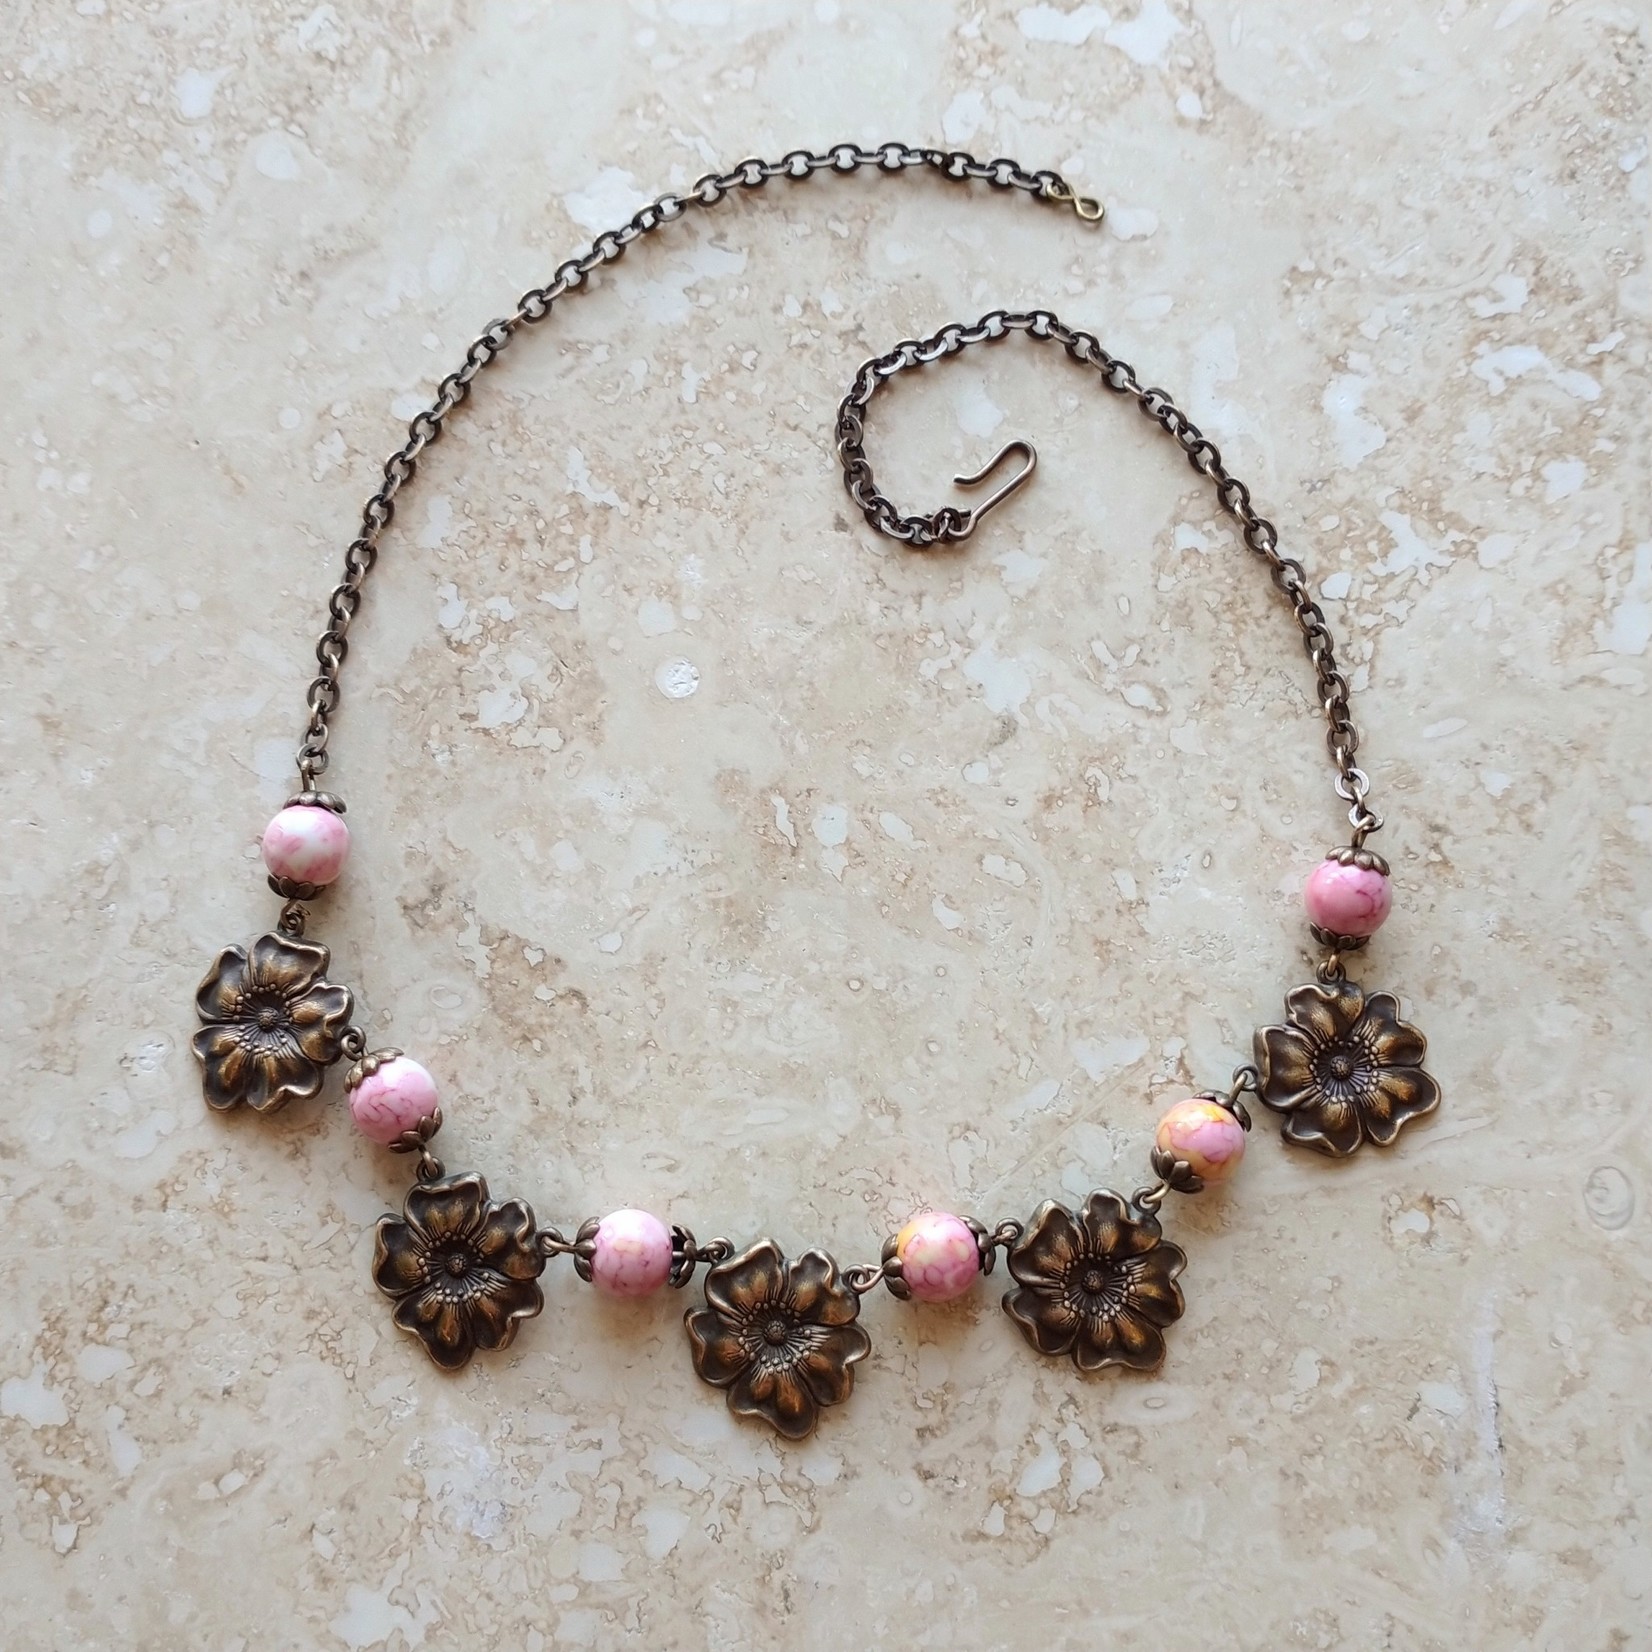 Chain of Flowers Necklace - Ready to Wear